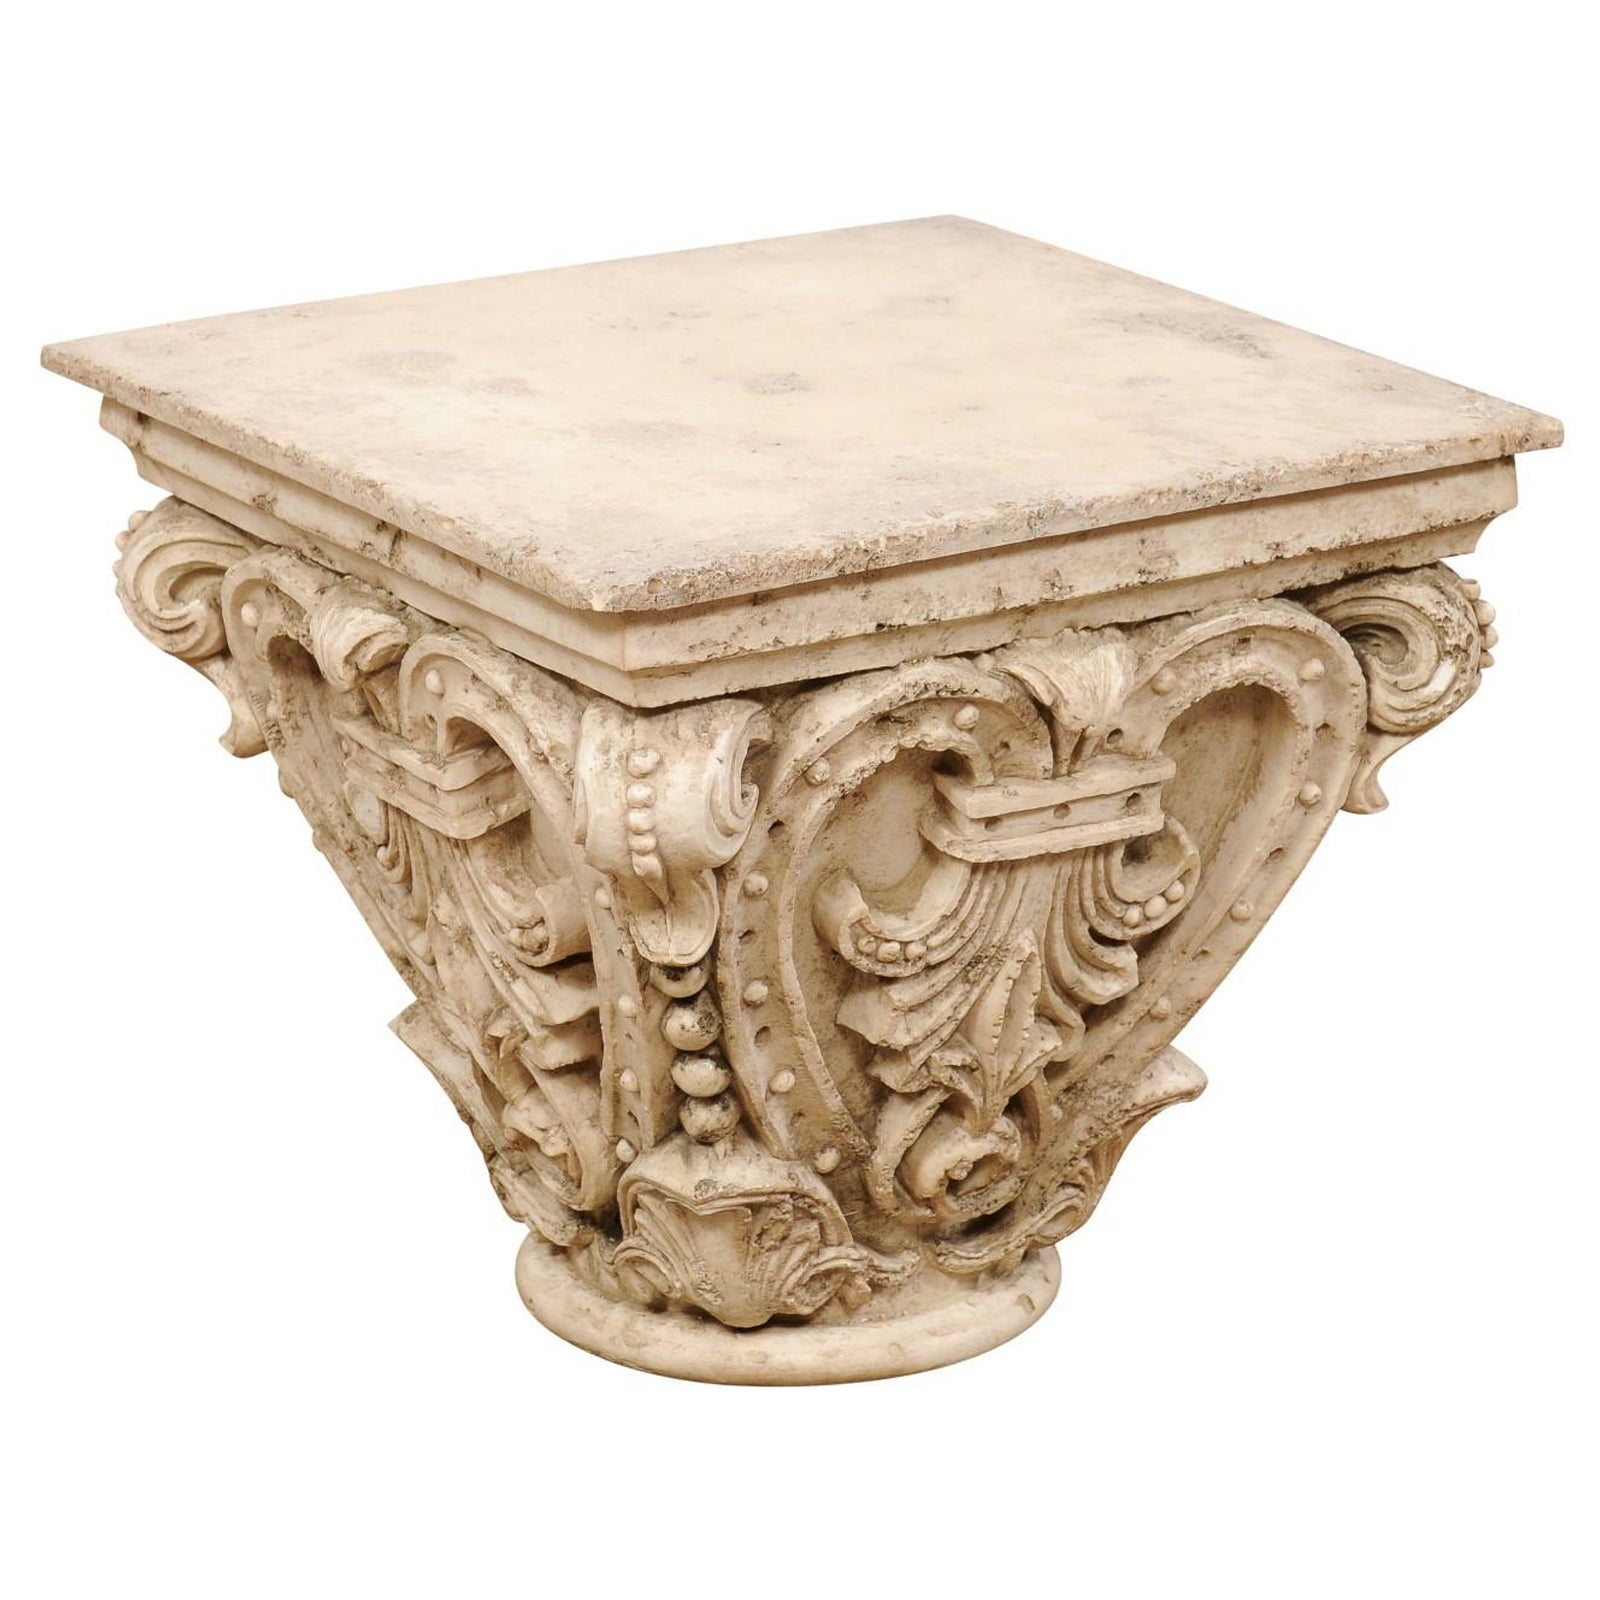 A French Ornately Designed Pedestal or Small Drinks Table